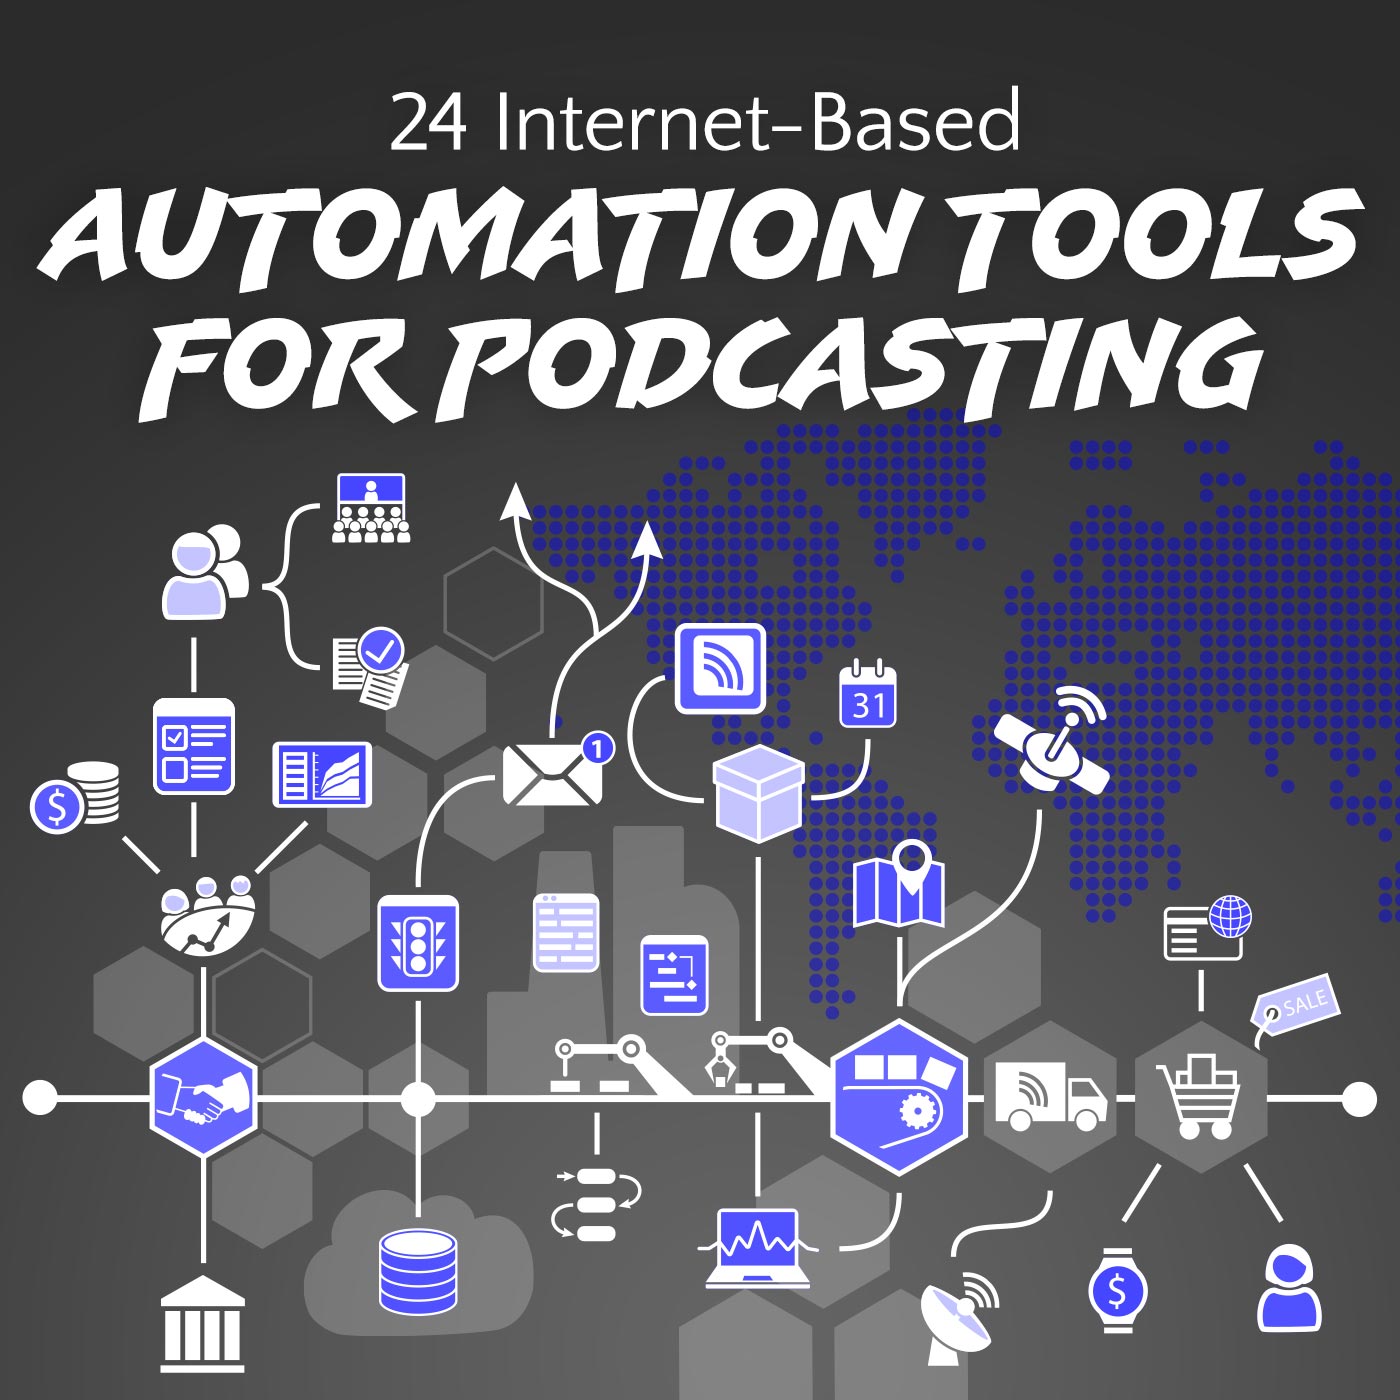 24 Internet-Based Automation Tools for Podcasting